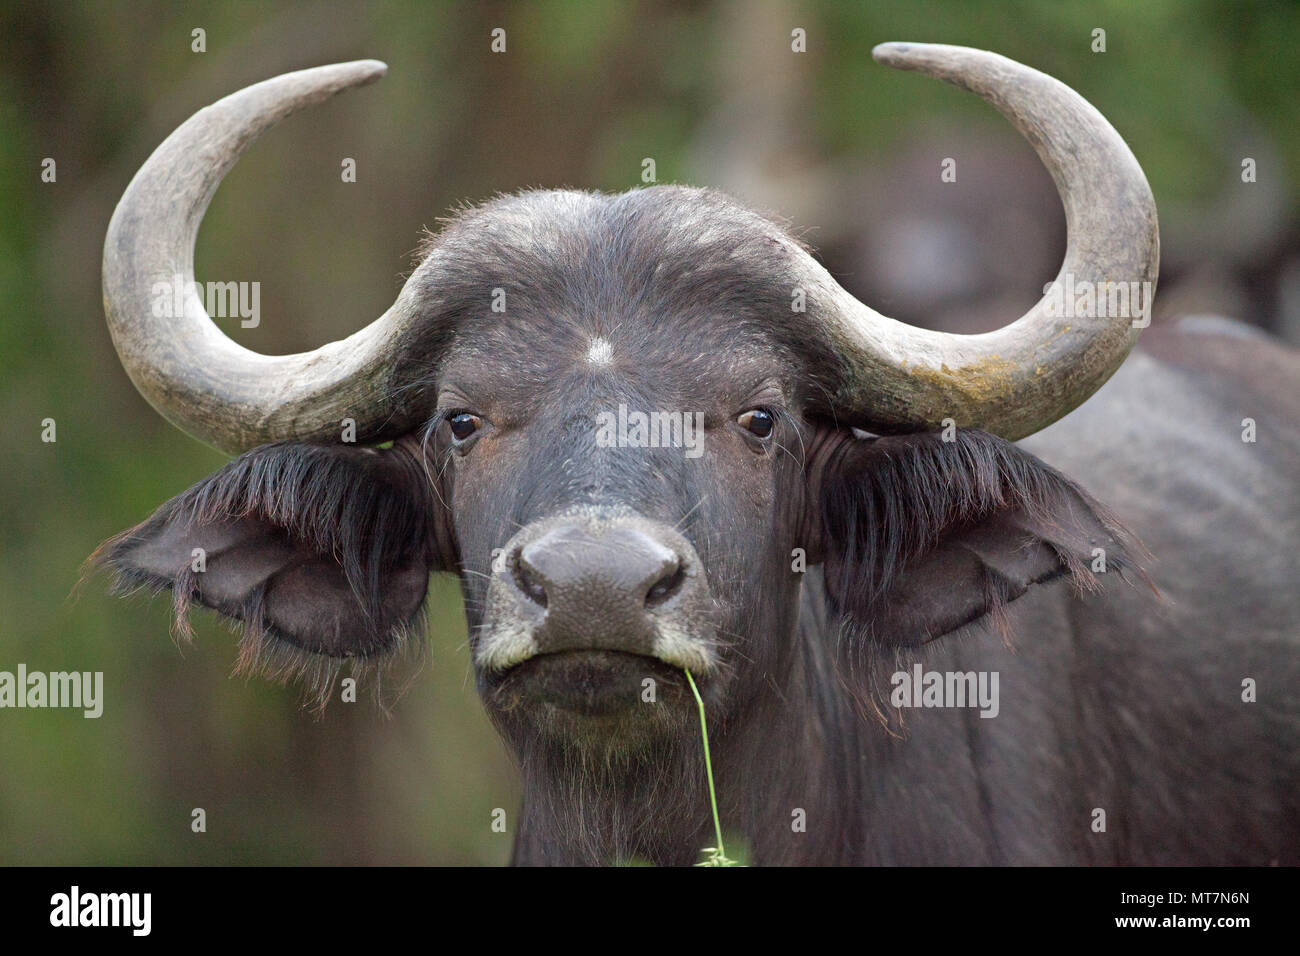 African Buffalo (Syncerus caffer). Female or Cow. Eat coarse, old grass and in doing so they expose the more tender grass shoots for the many other herbivores. Stock Photo